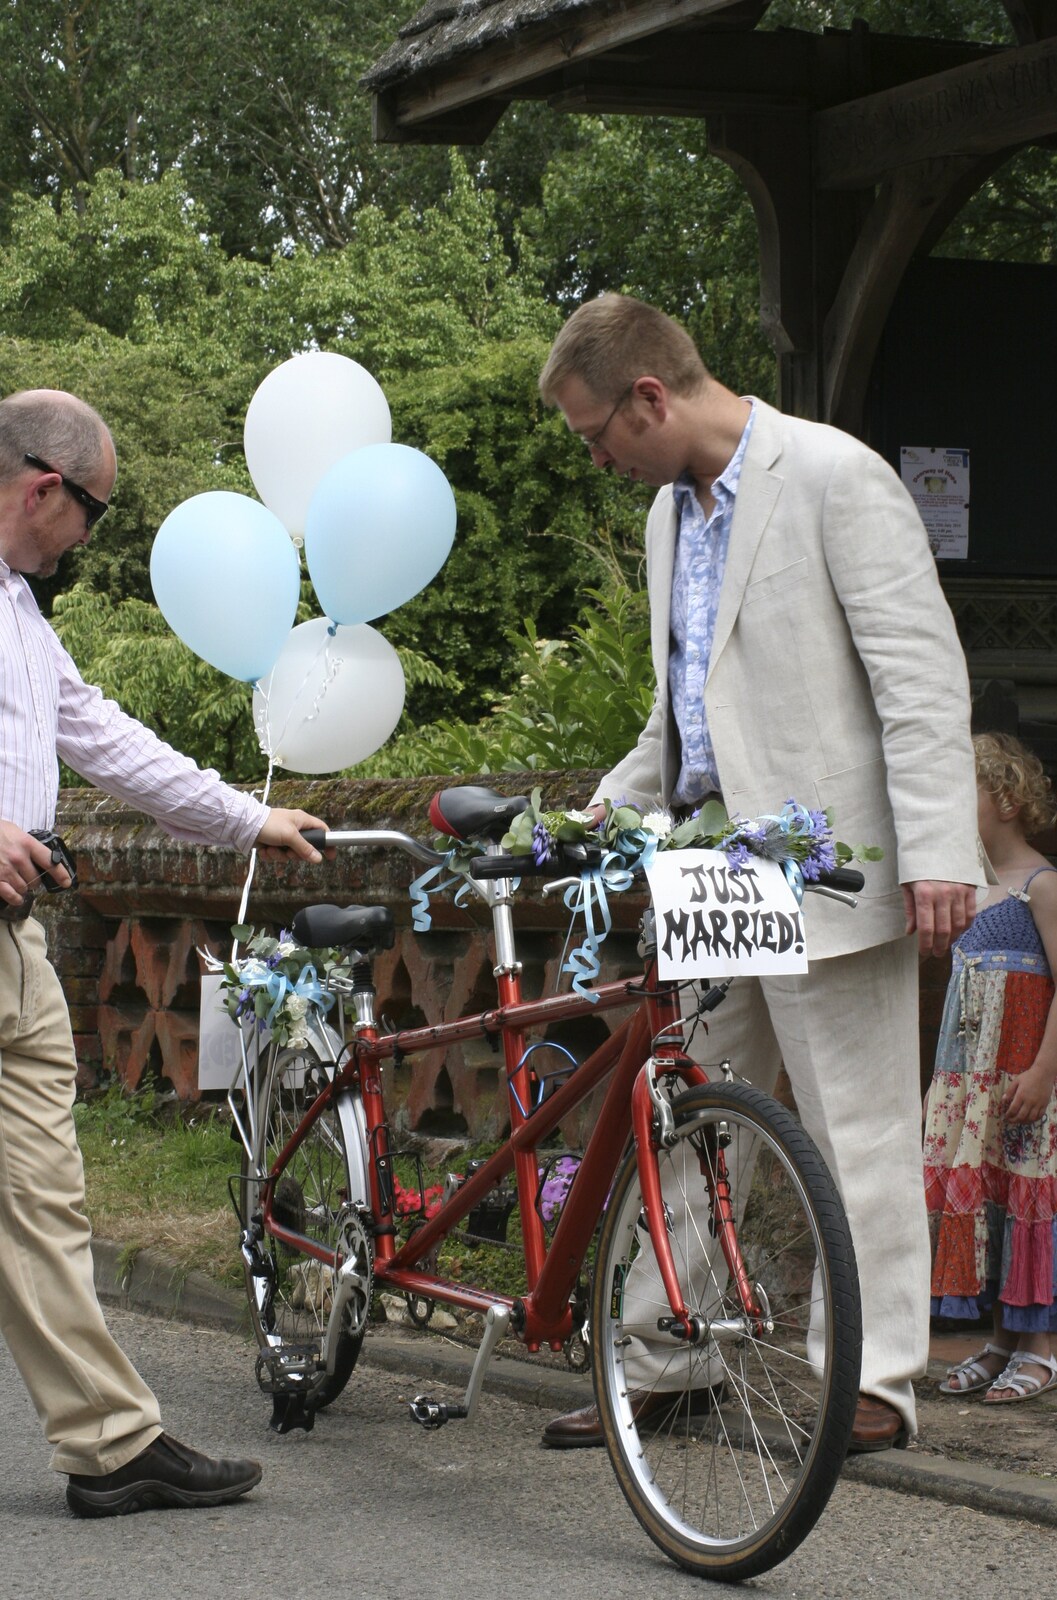 Marc preps the tandem from Nosher and Isobel's Wedding, Brome, Suffolk - 3rd July 2010